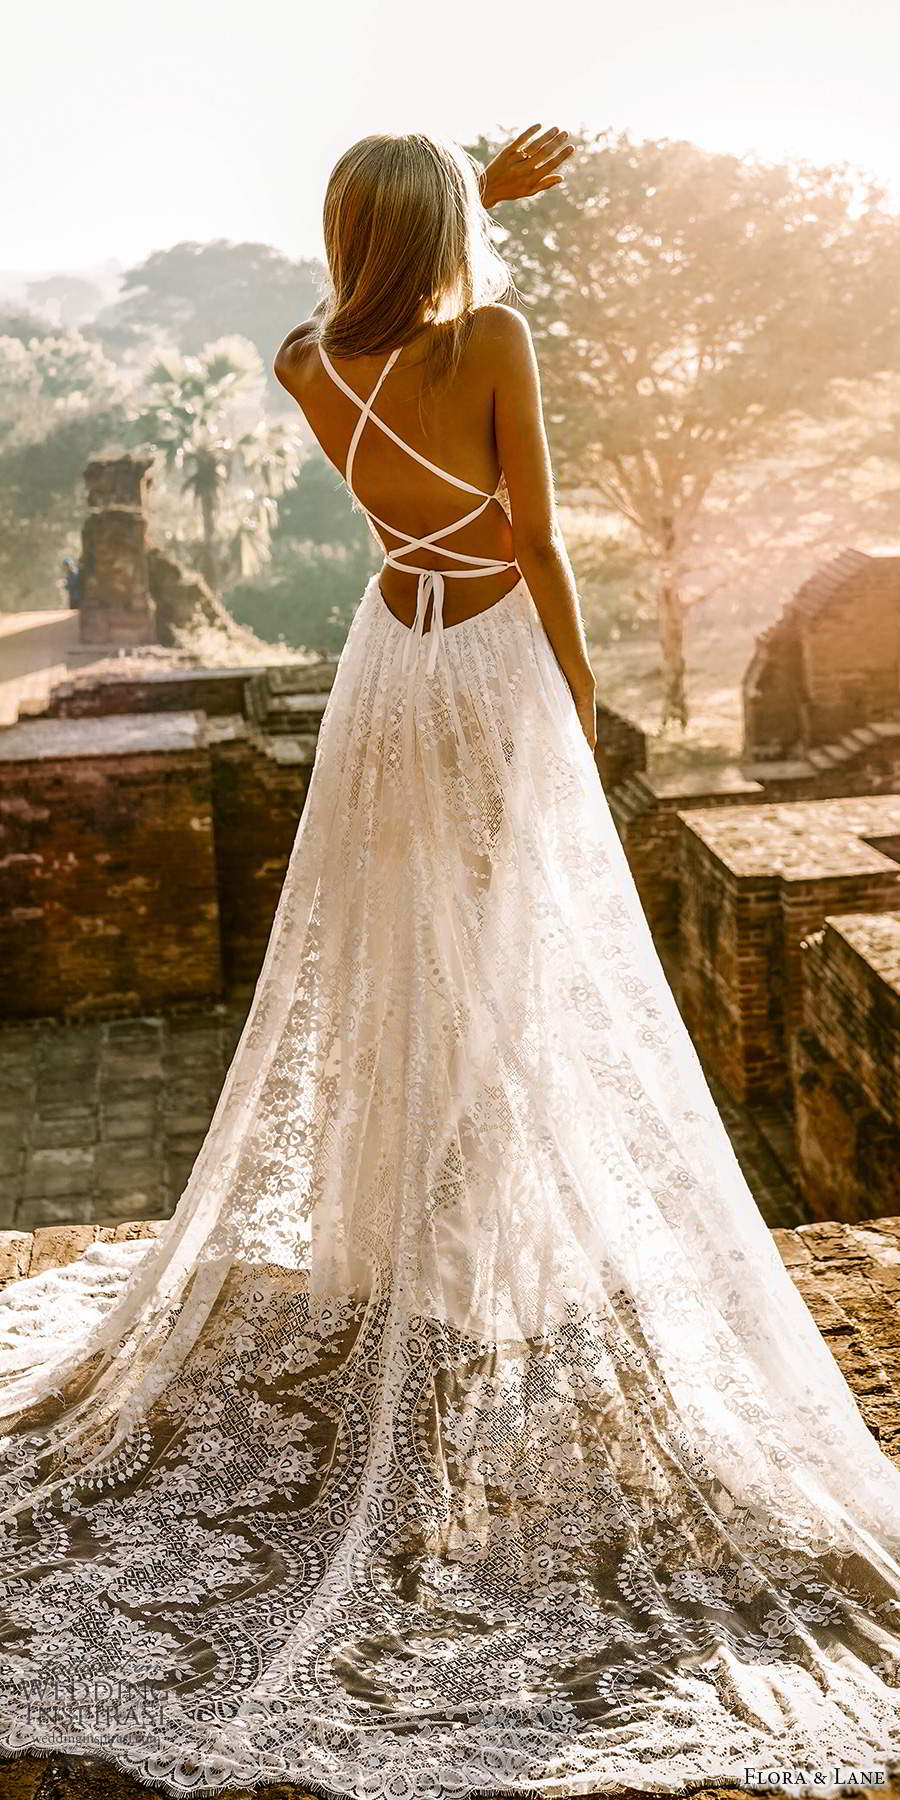 flora and lane 2019 bridal sleeveless straps sweetheart neckline fully embellished lace boho romantic a line ball gown wedding dress open back chapel train (1) bv 